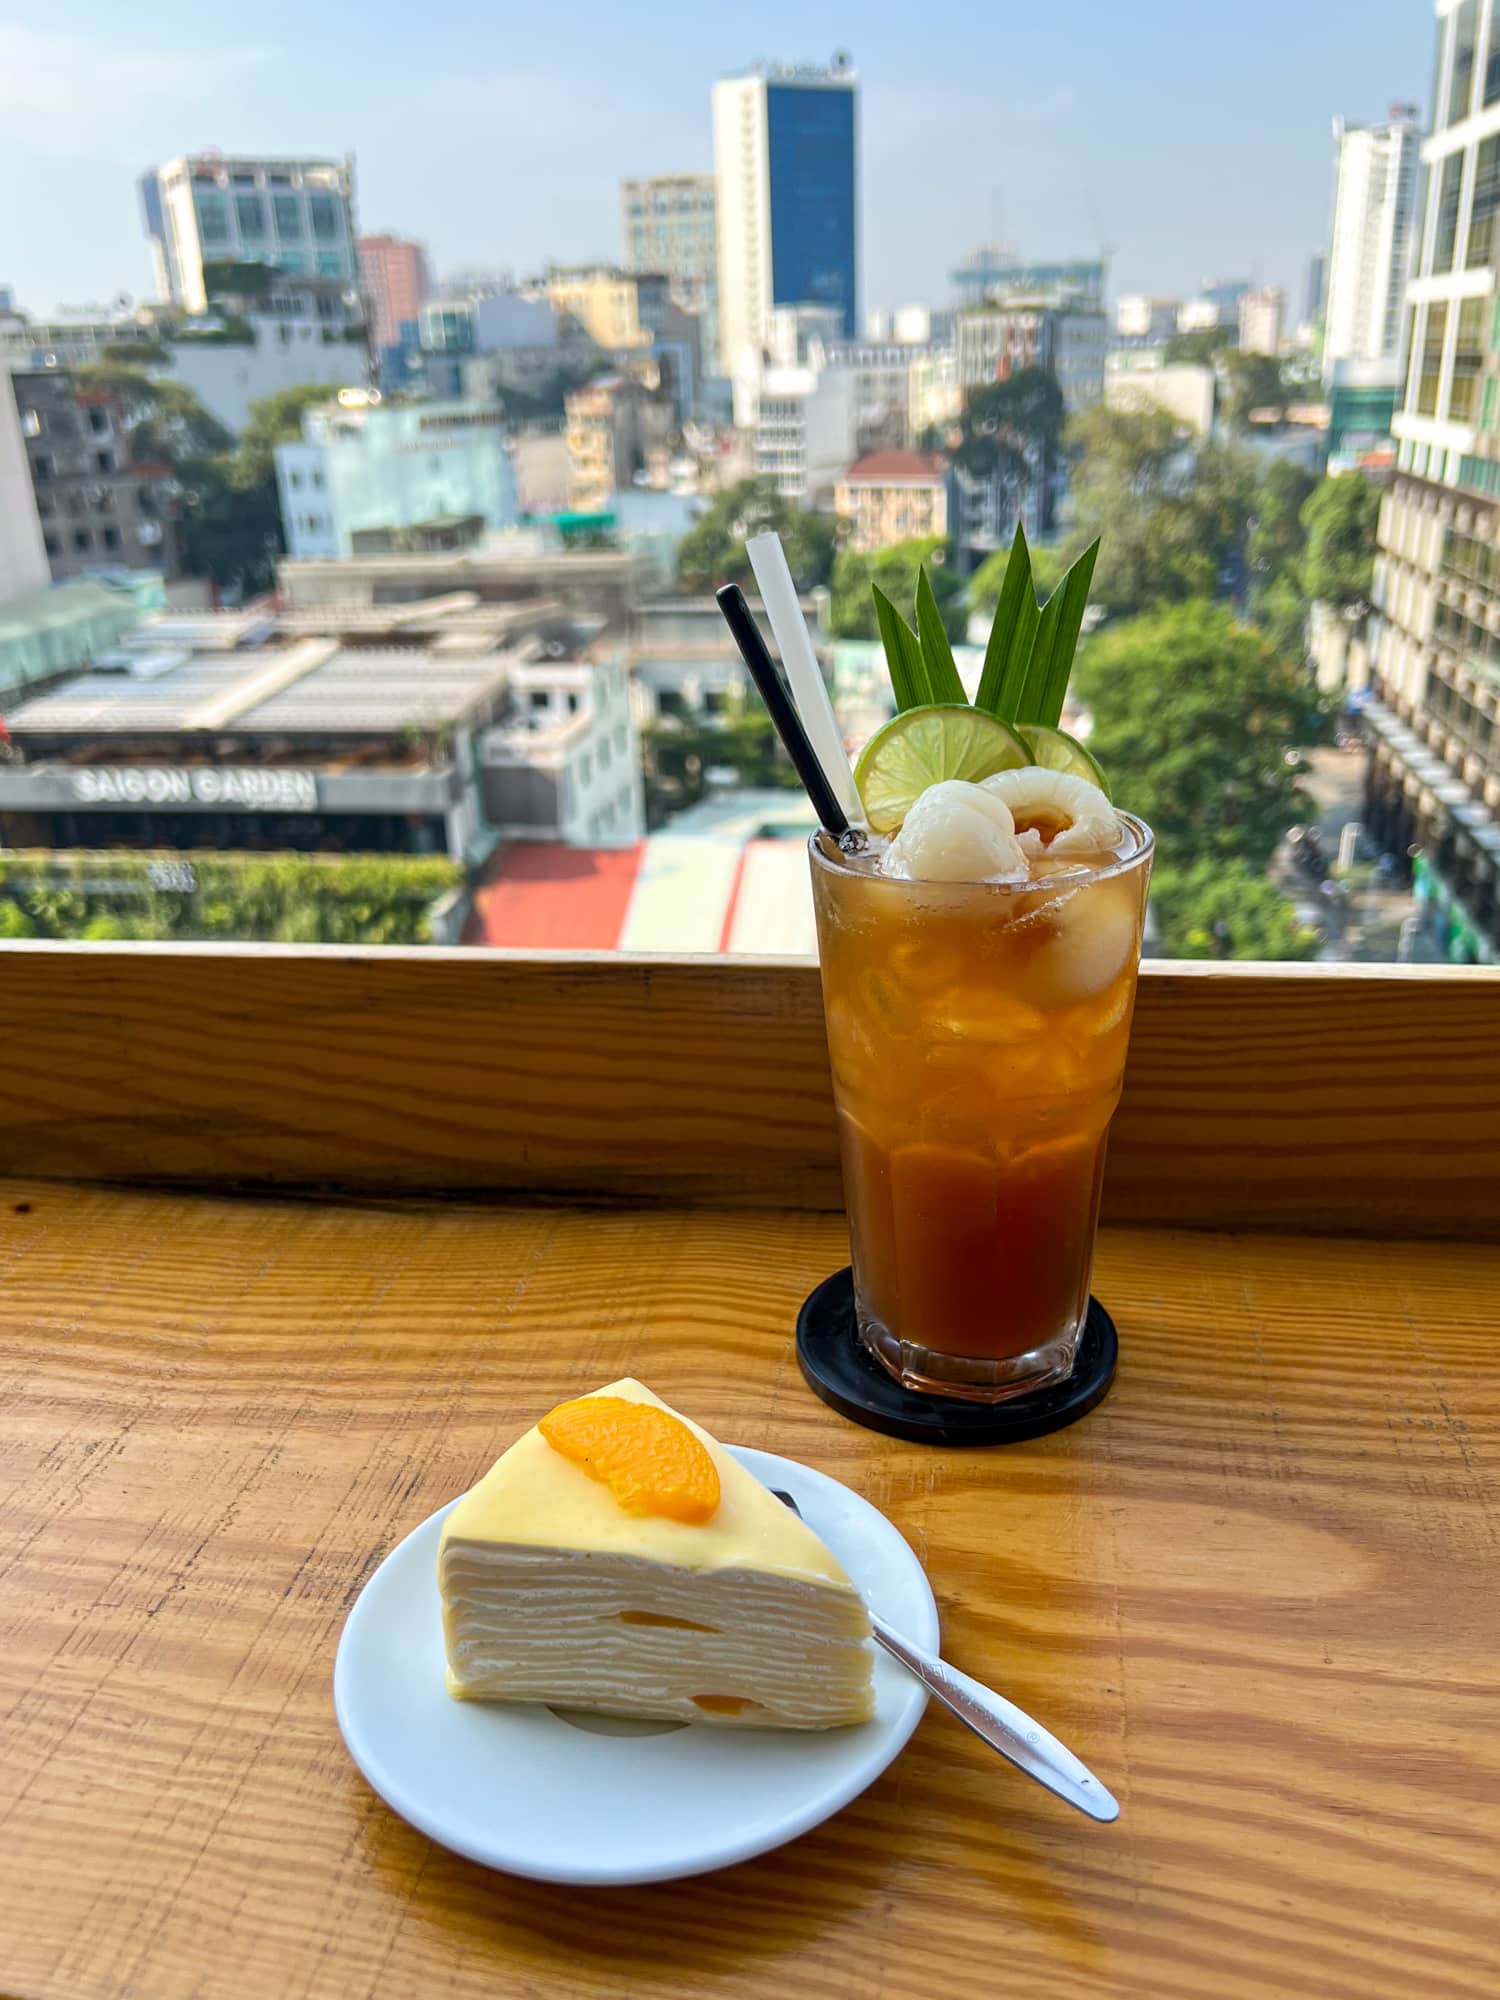 Lychee iced tea and peach pastry